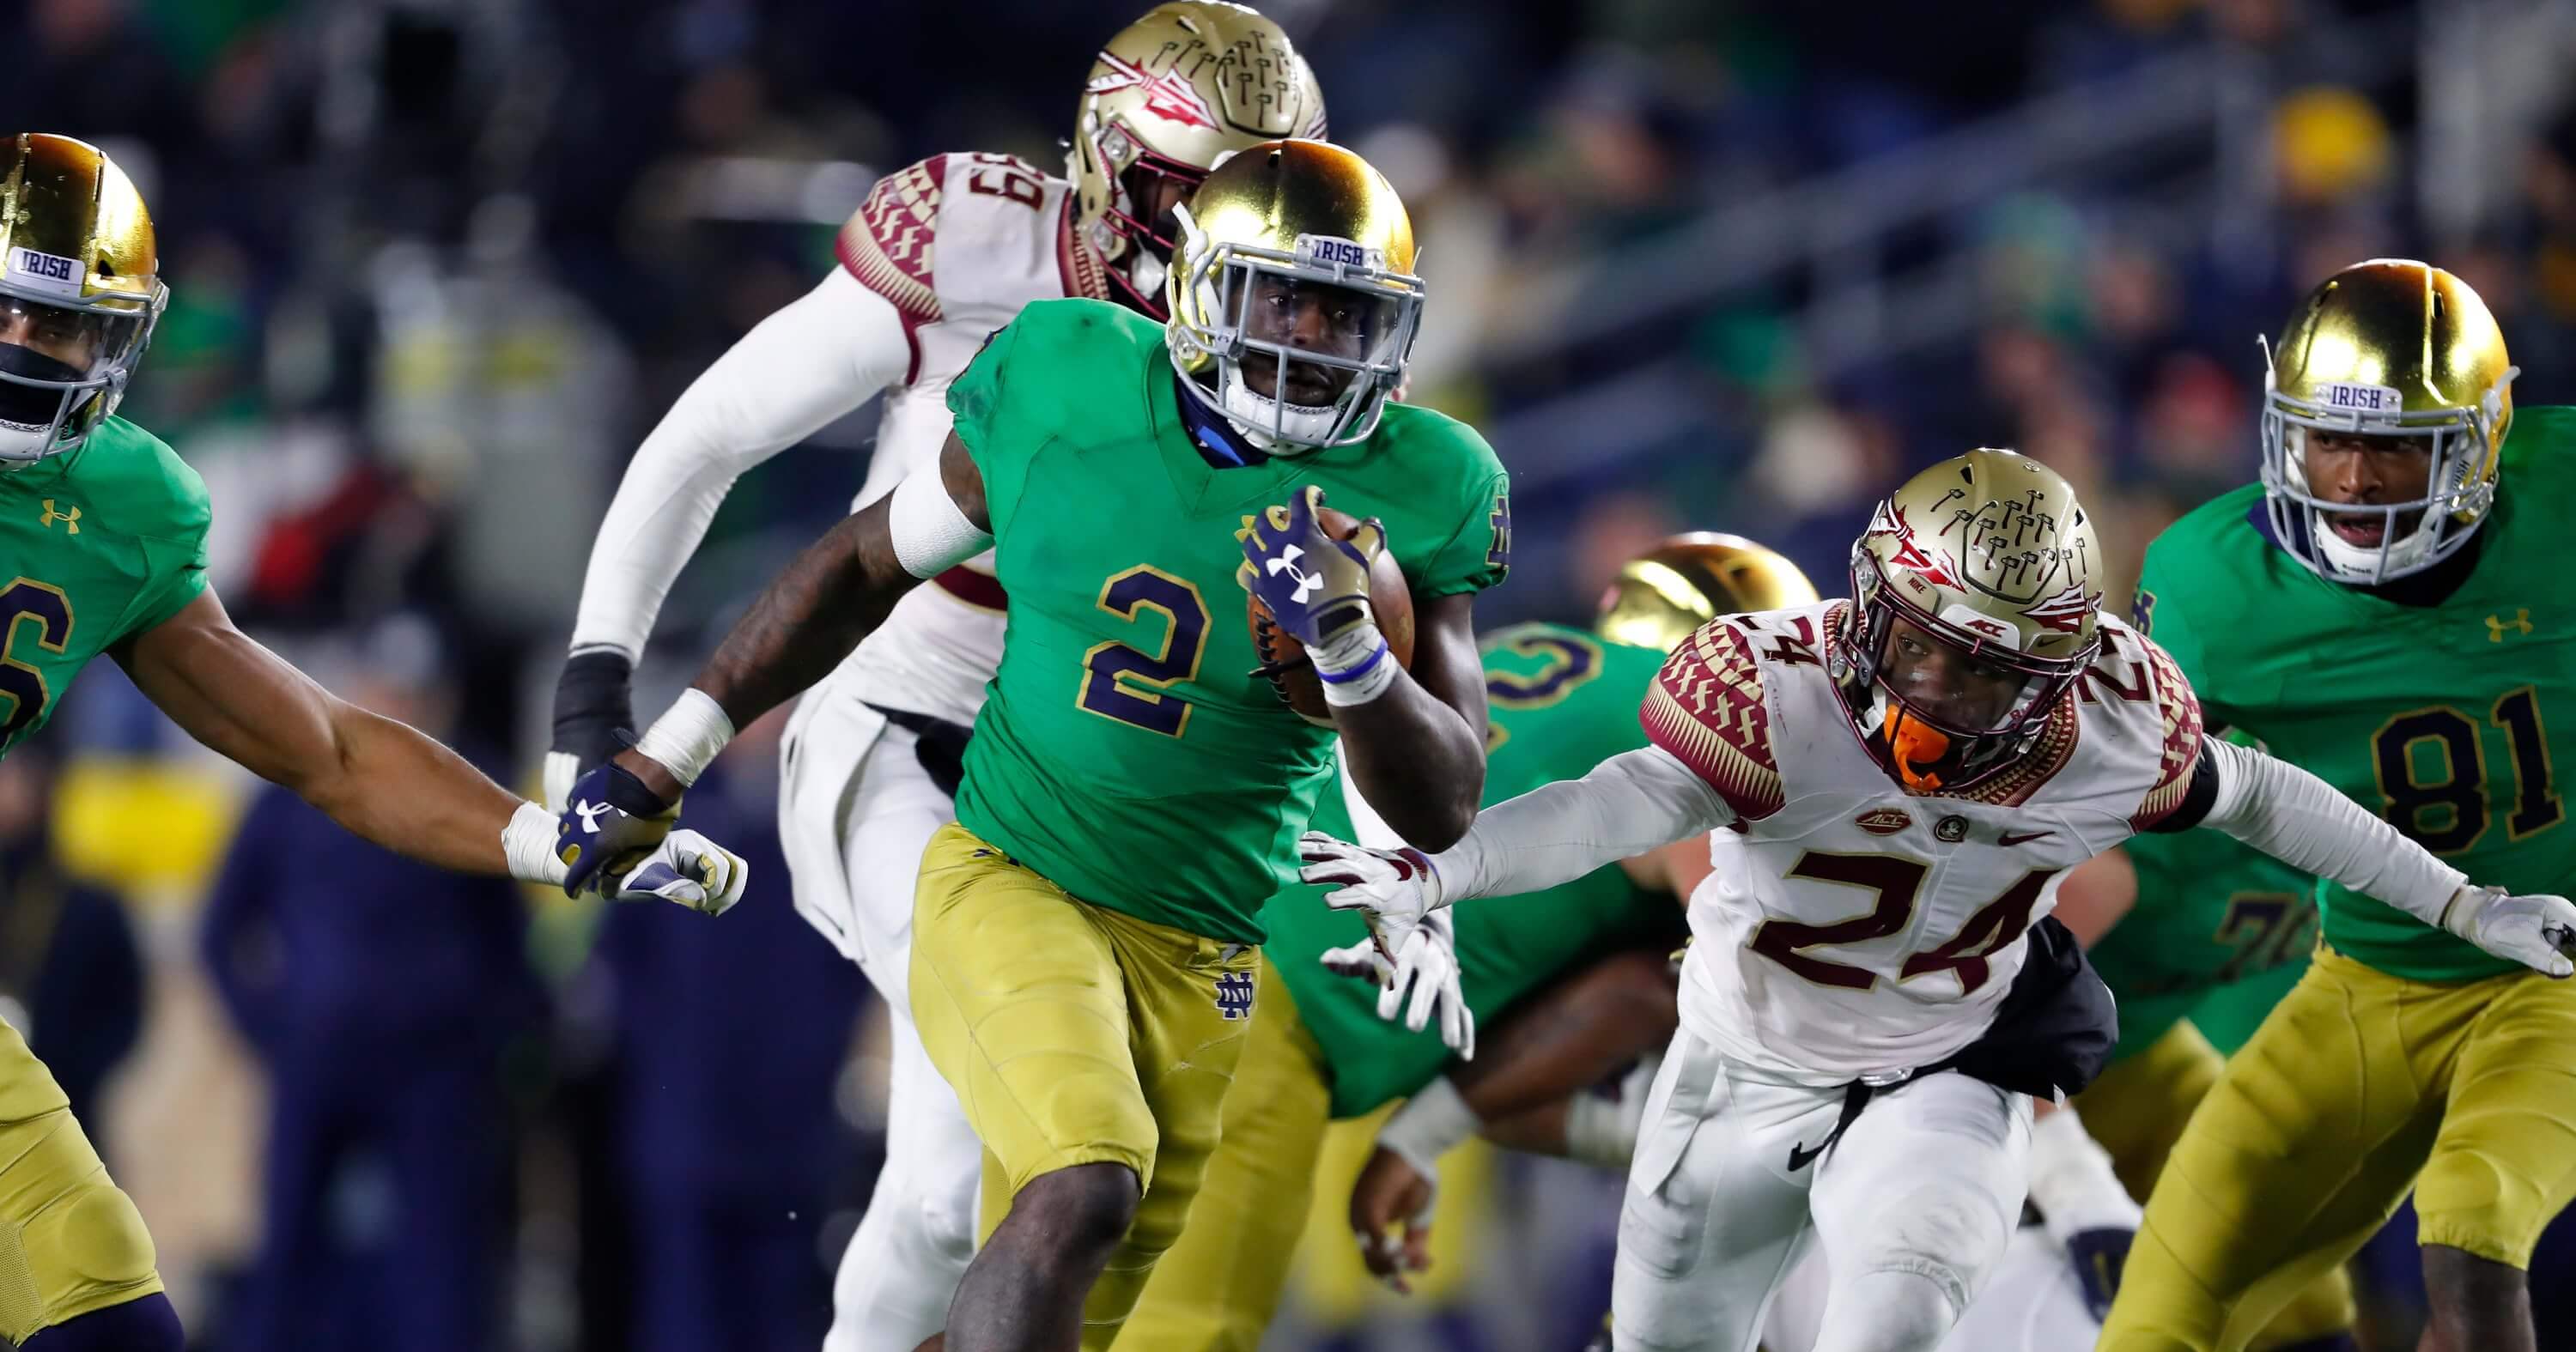 Notre Dame running back Dexter Williams runs for a touchdown against Florida State on Saturday in South Bend, Indiana.